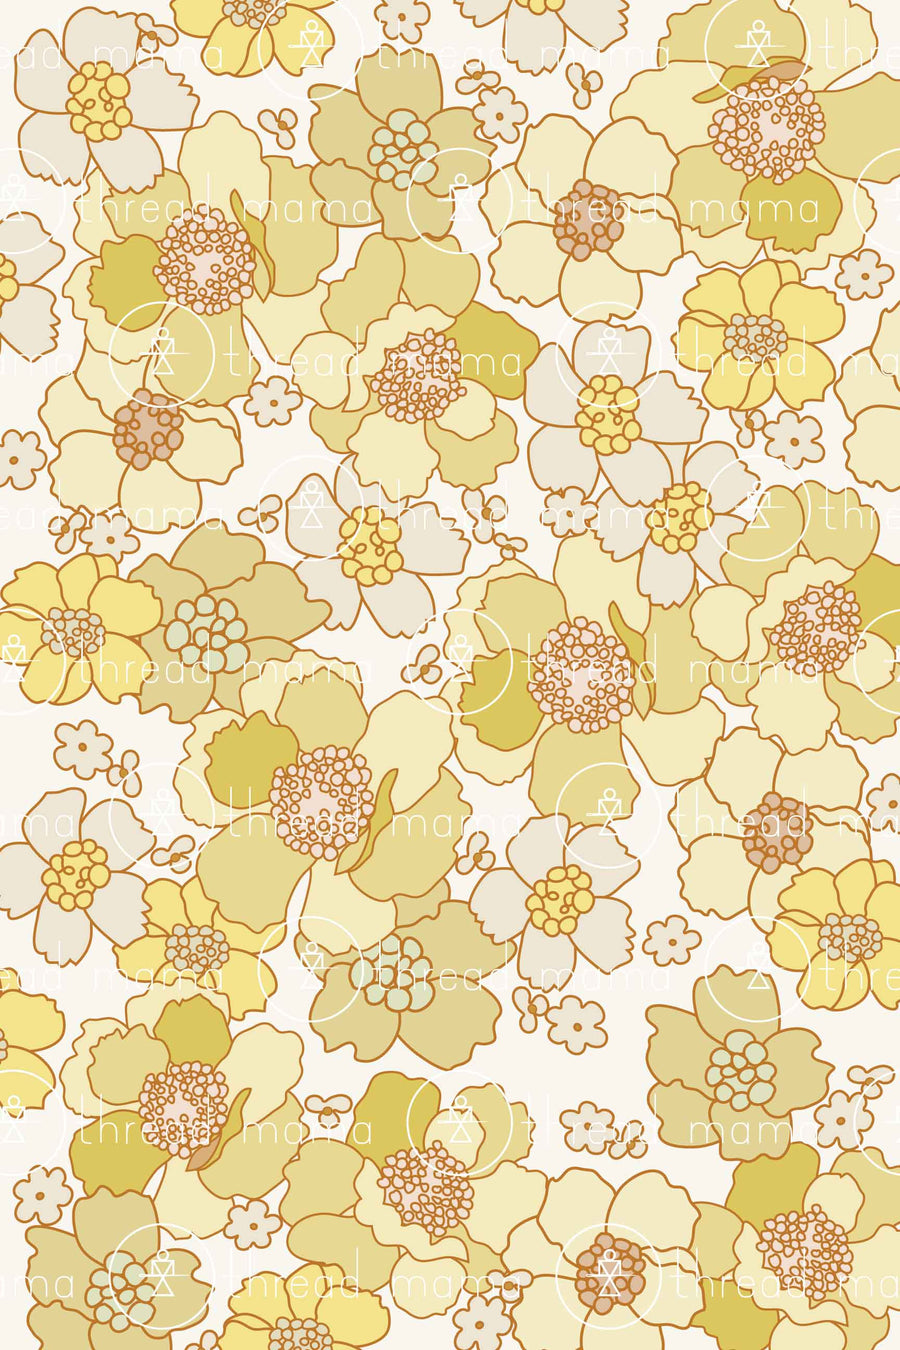 Background Pattern #17 (Printable Poster)